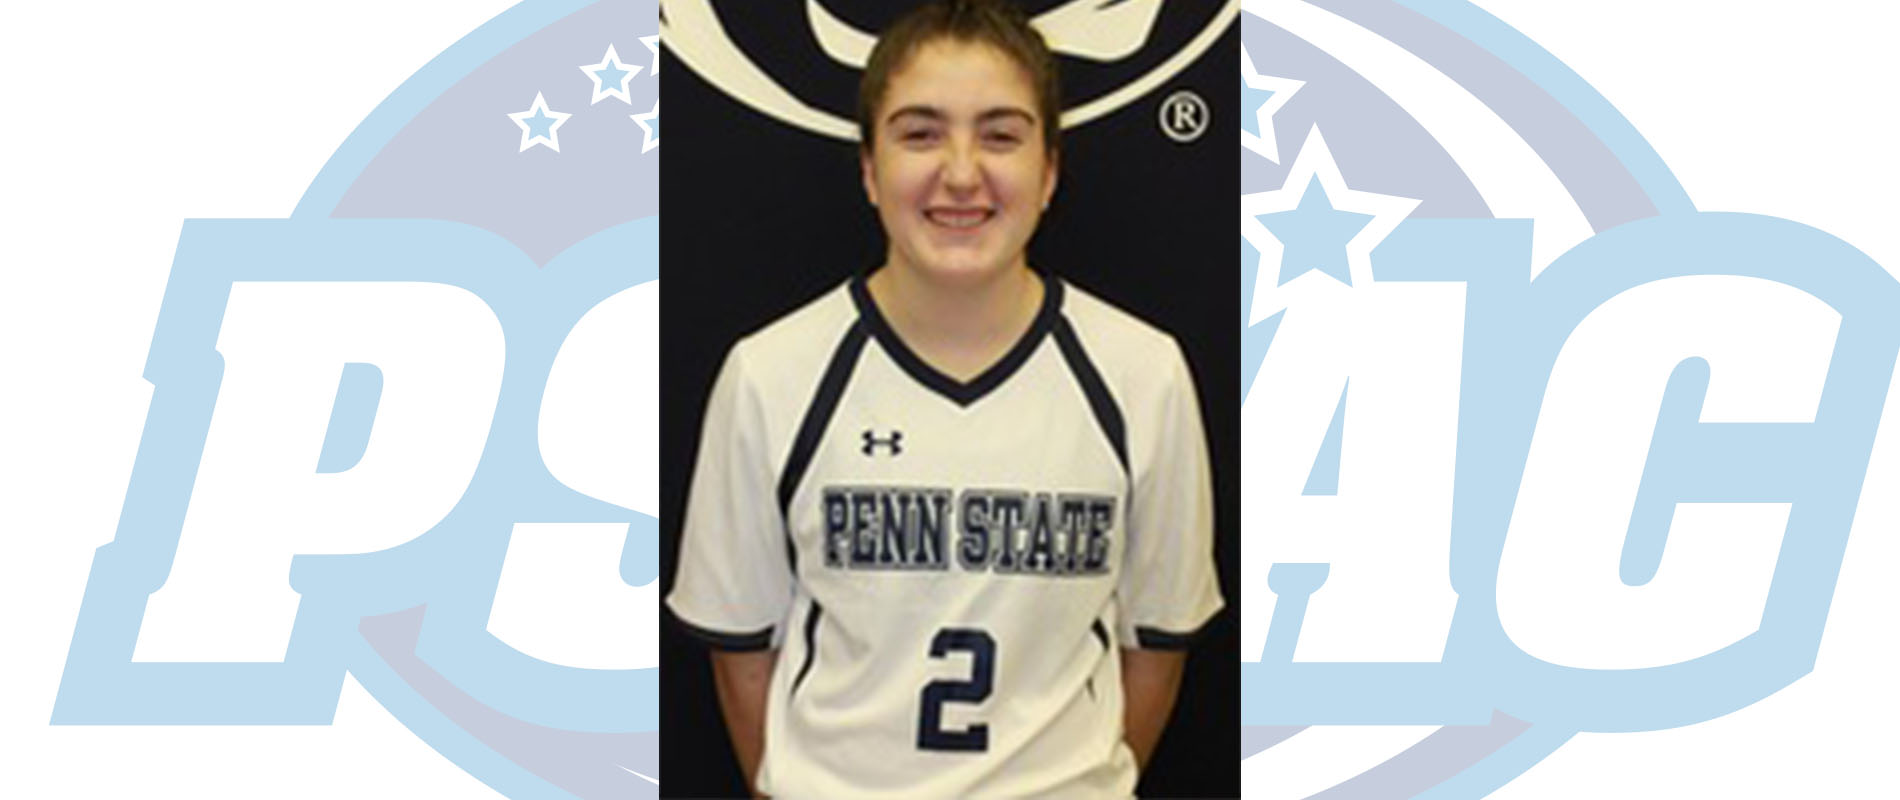 Penn State Greater Allegheny's Sydney Fritchman.